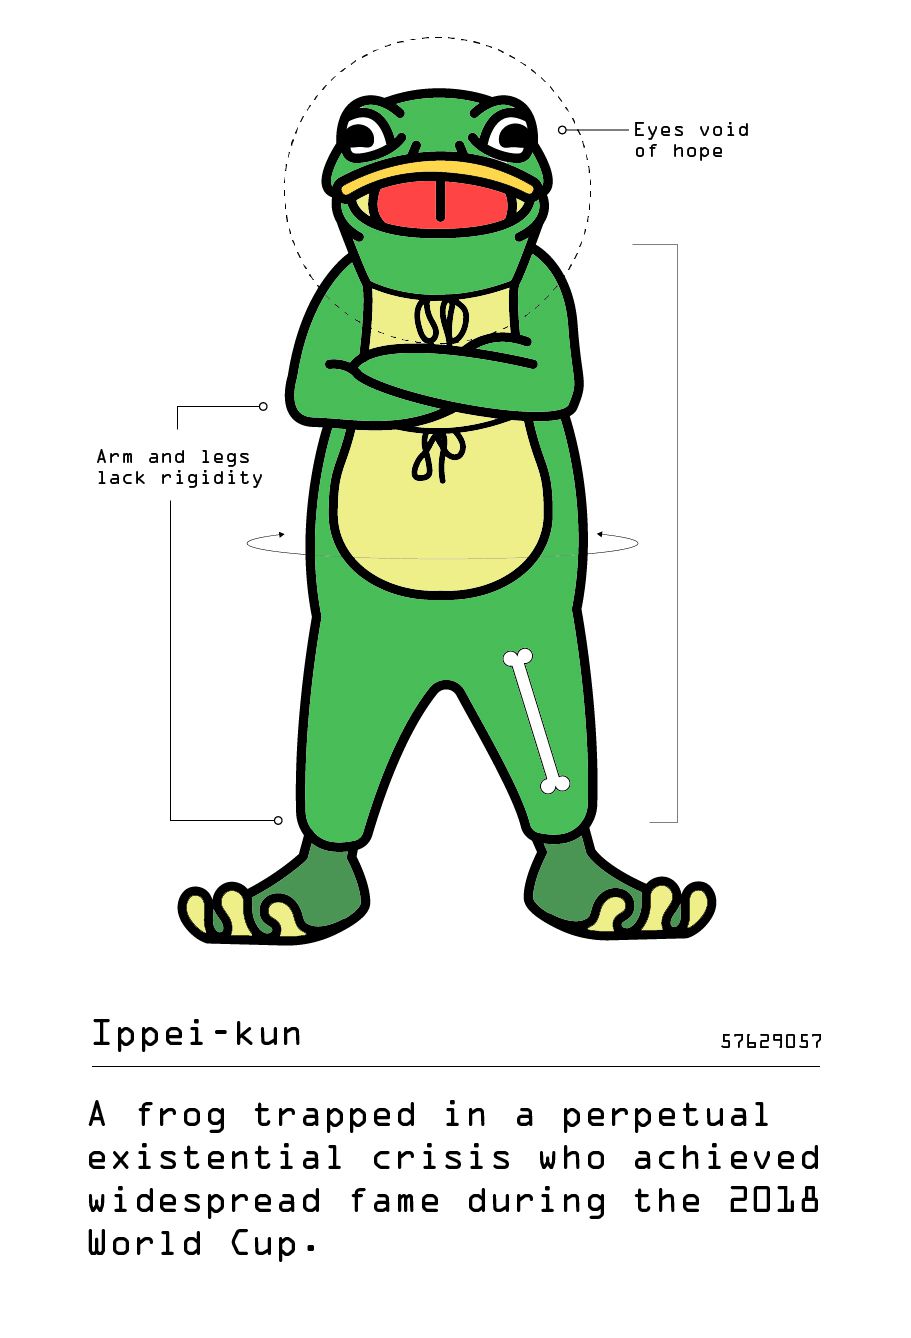 scientific illustration of mascot frog, Ippei-kun who was seen throughout the 2018 World Cup